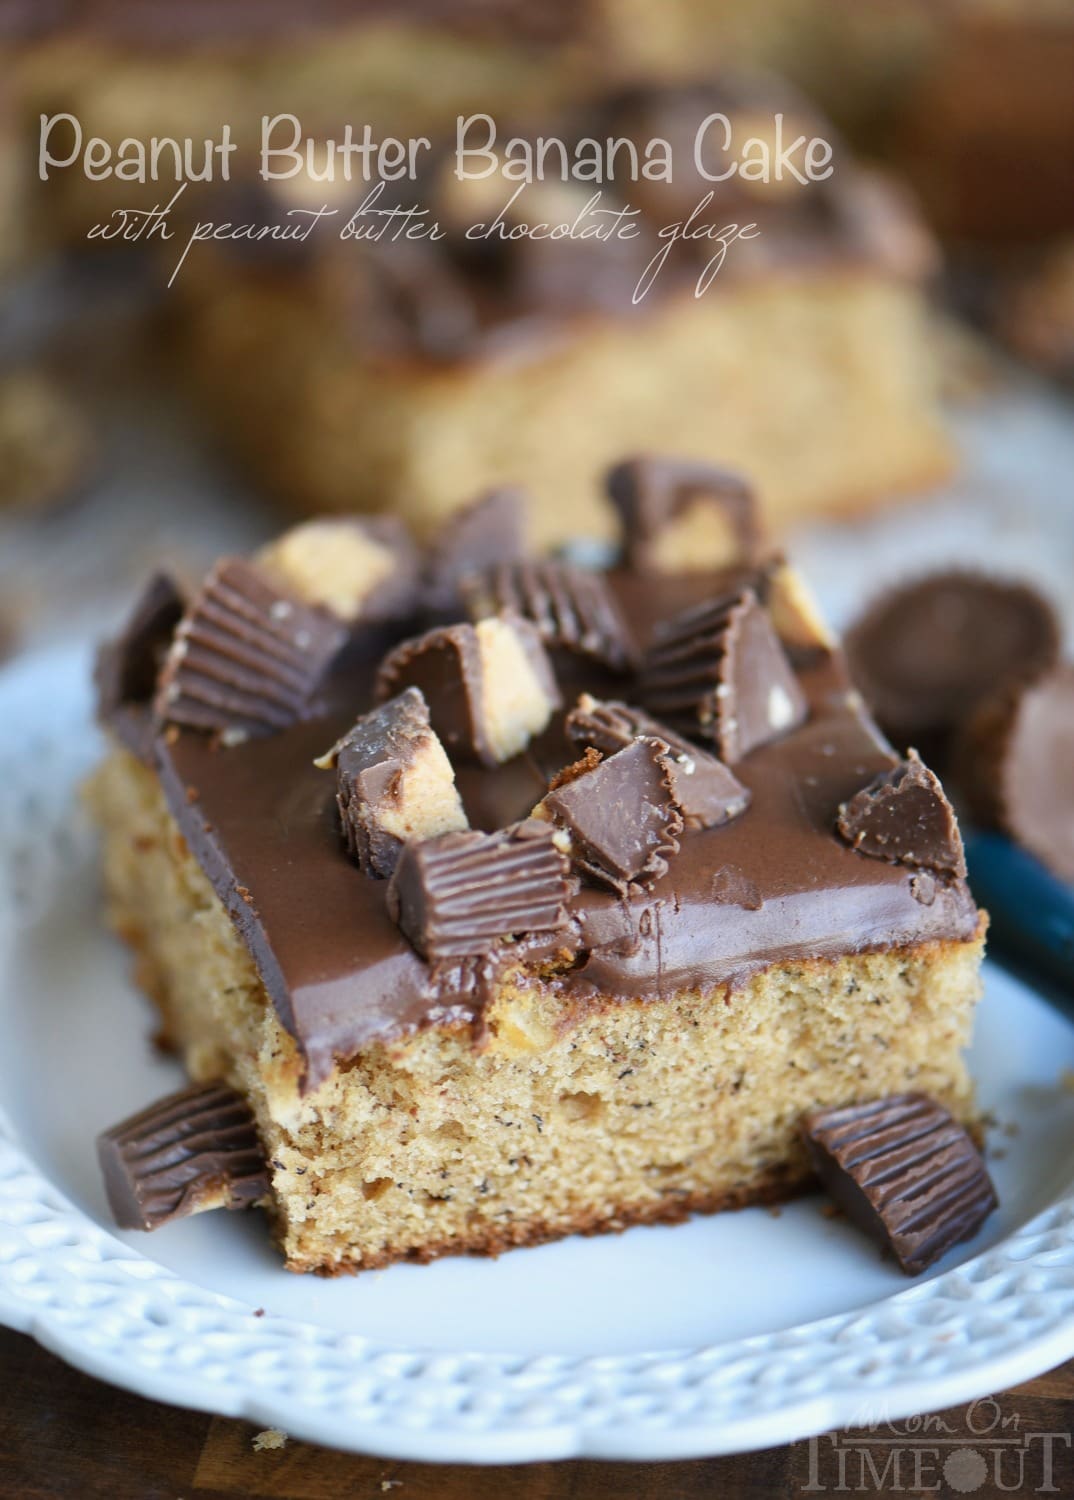 This easy Peanut Butter Banana Cake is topped with a peanut butter chocolate glaze and Reese's candy! An easy dessert that feeds a crowd! Great for parties and peanut butter lovers! // Mom On Timeout